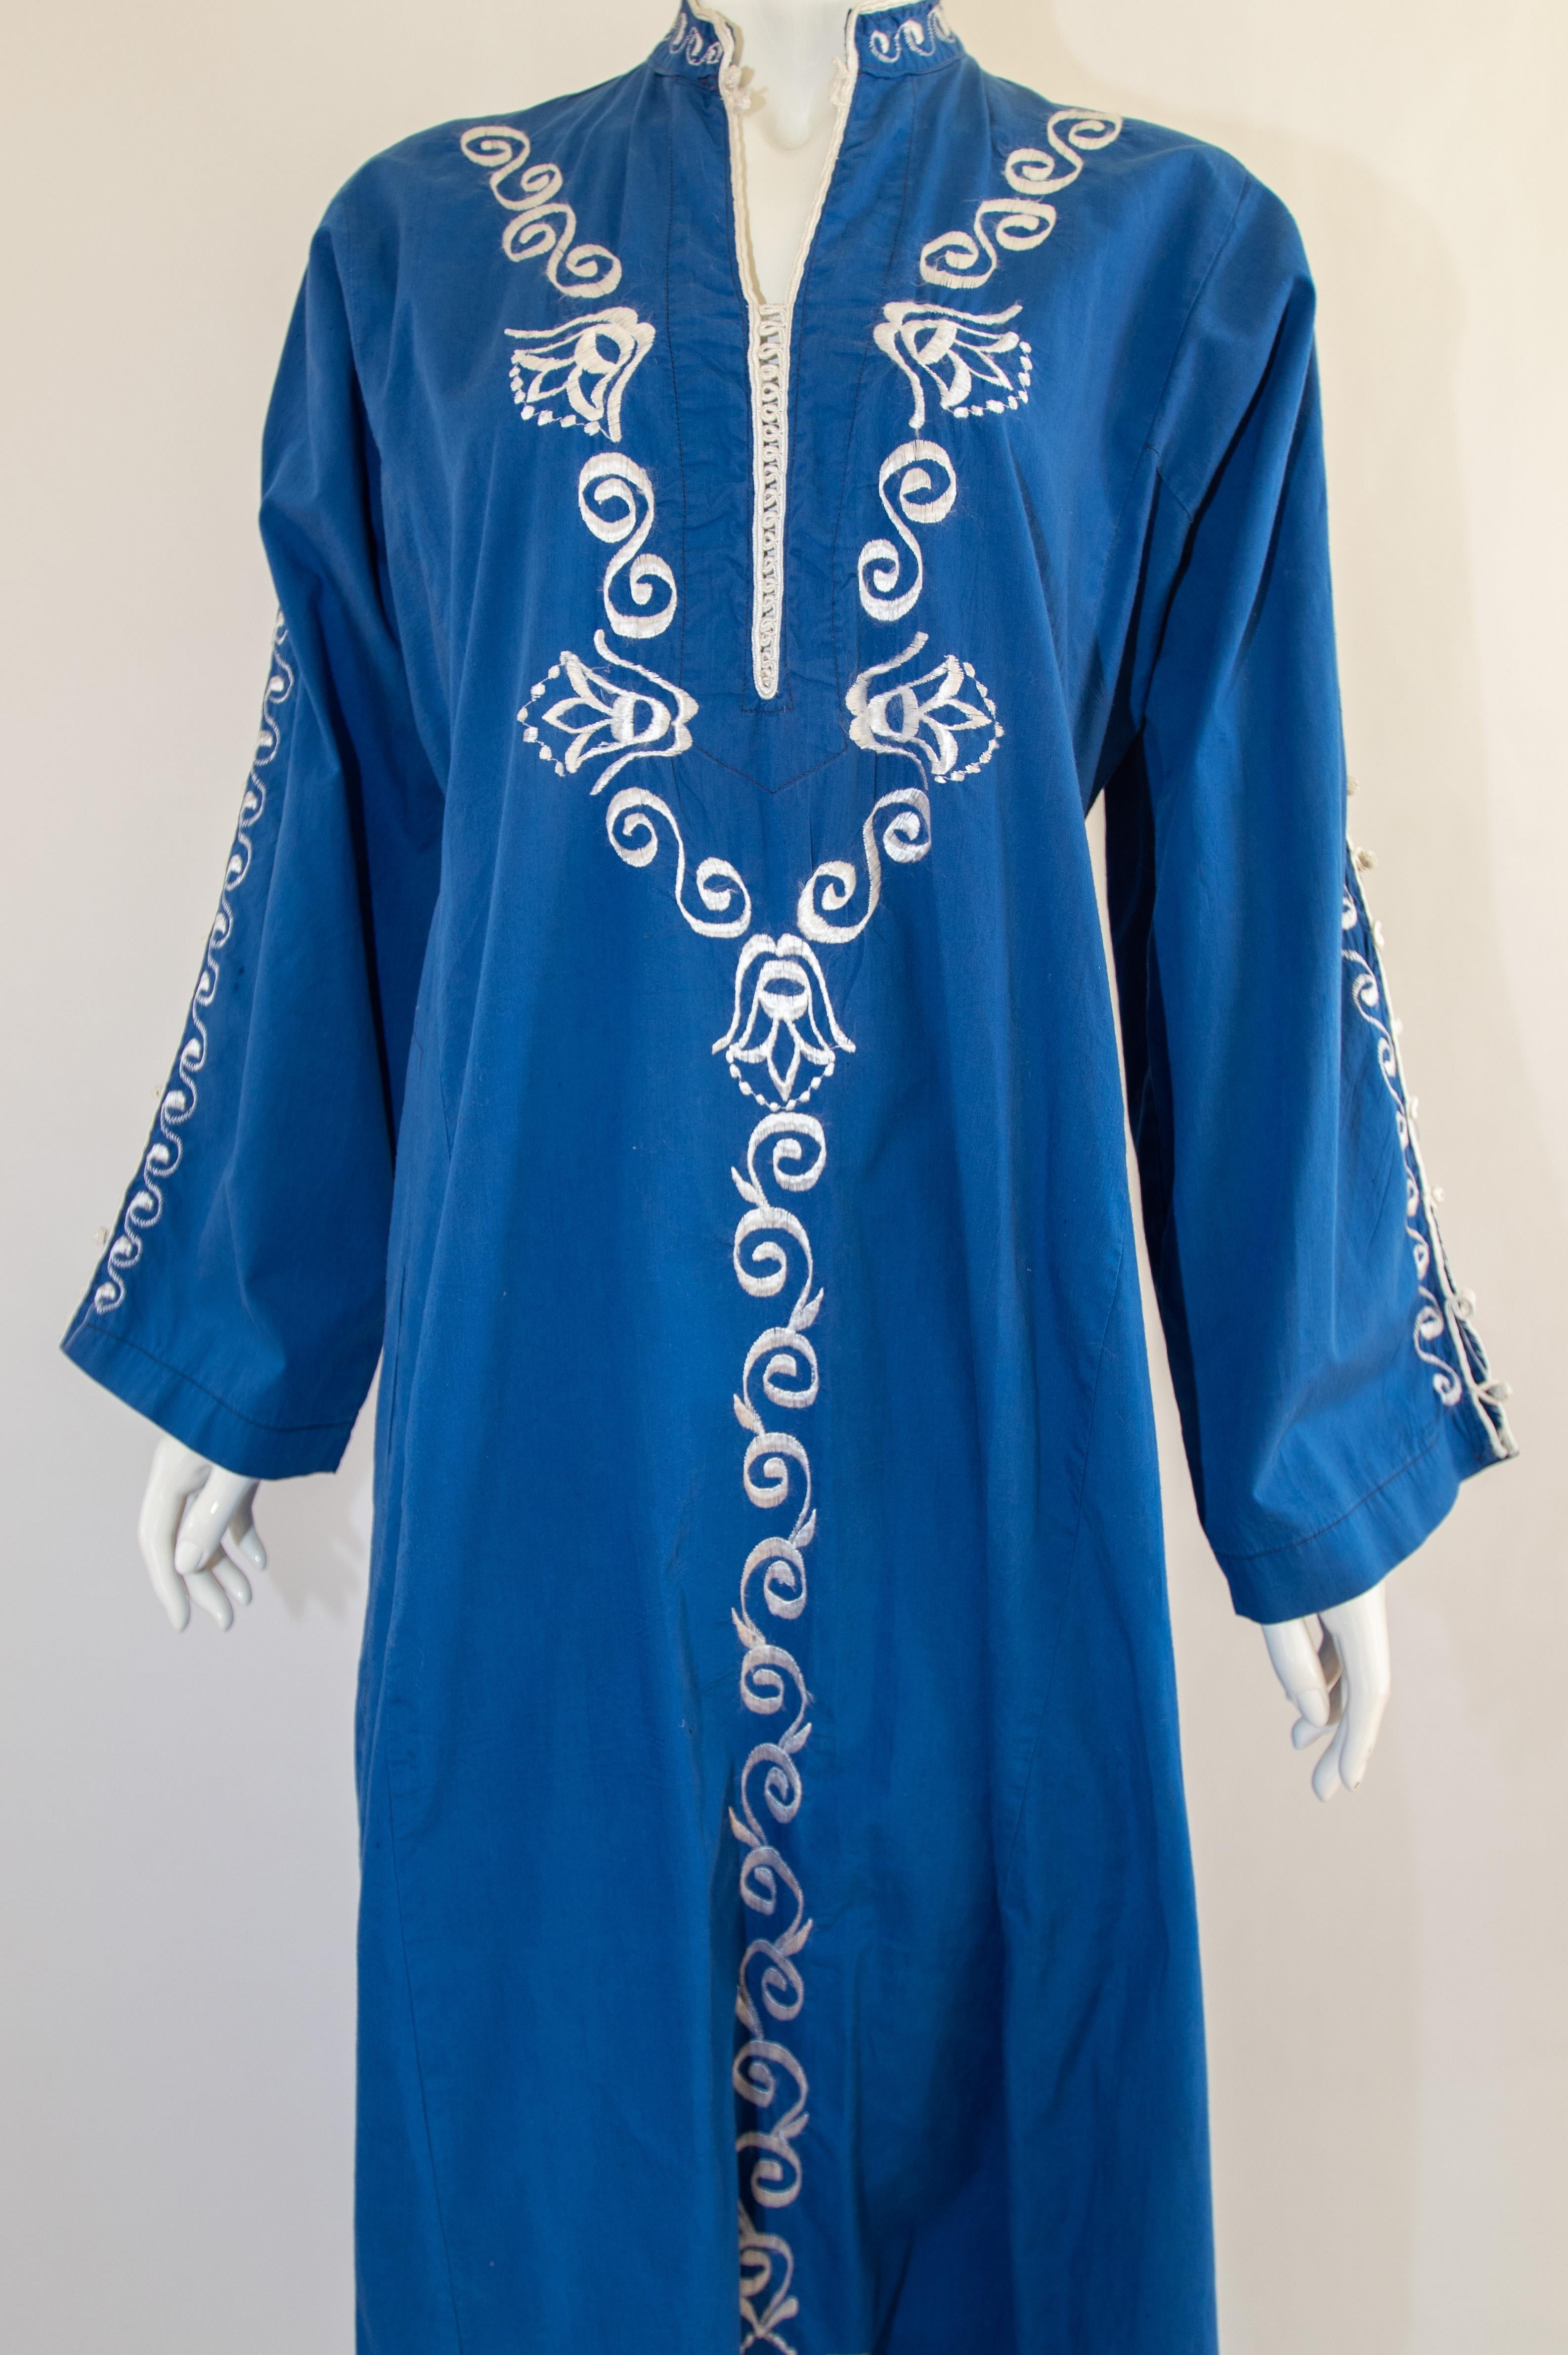 Moroccan Vintage Blue Caftan, 1970 Maxi Dress Kaftan In Good Condition For Sale In North Hollywood, CA